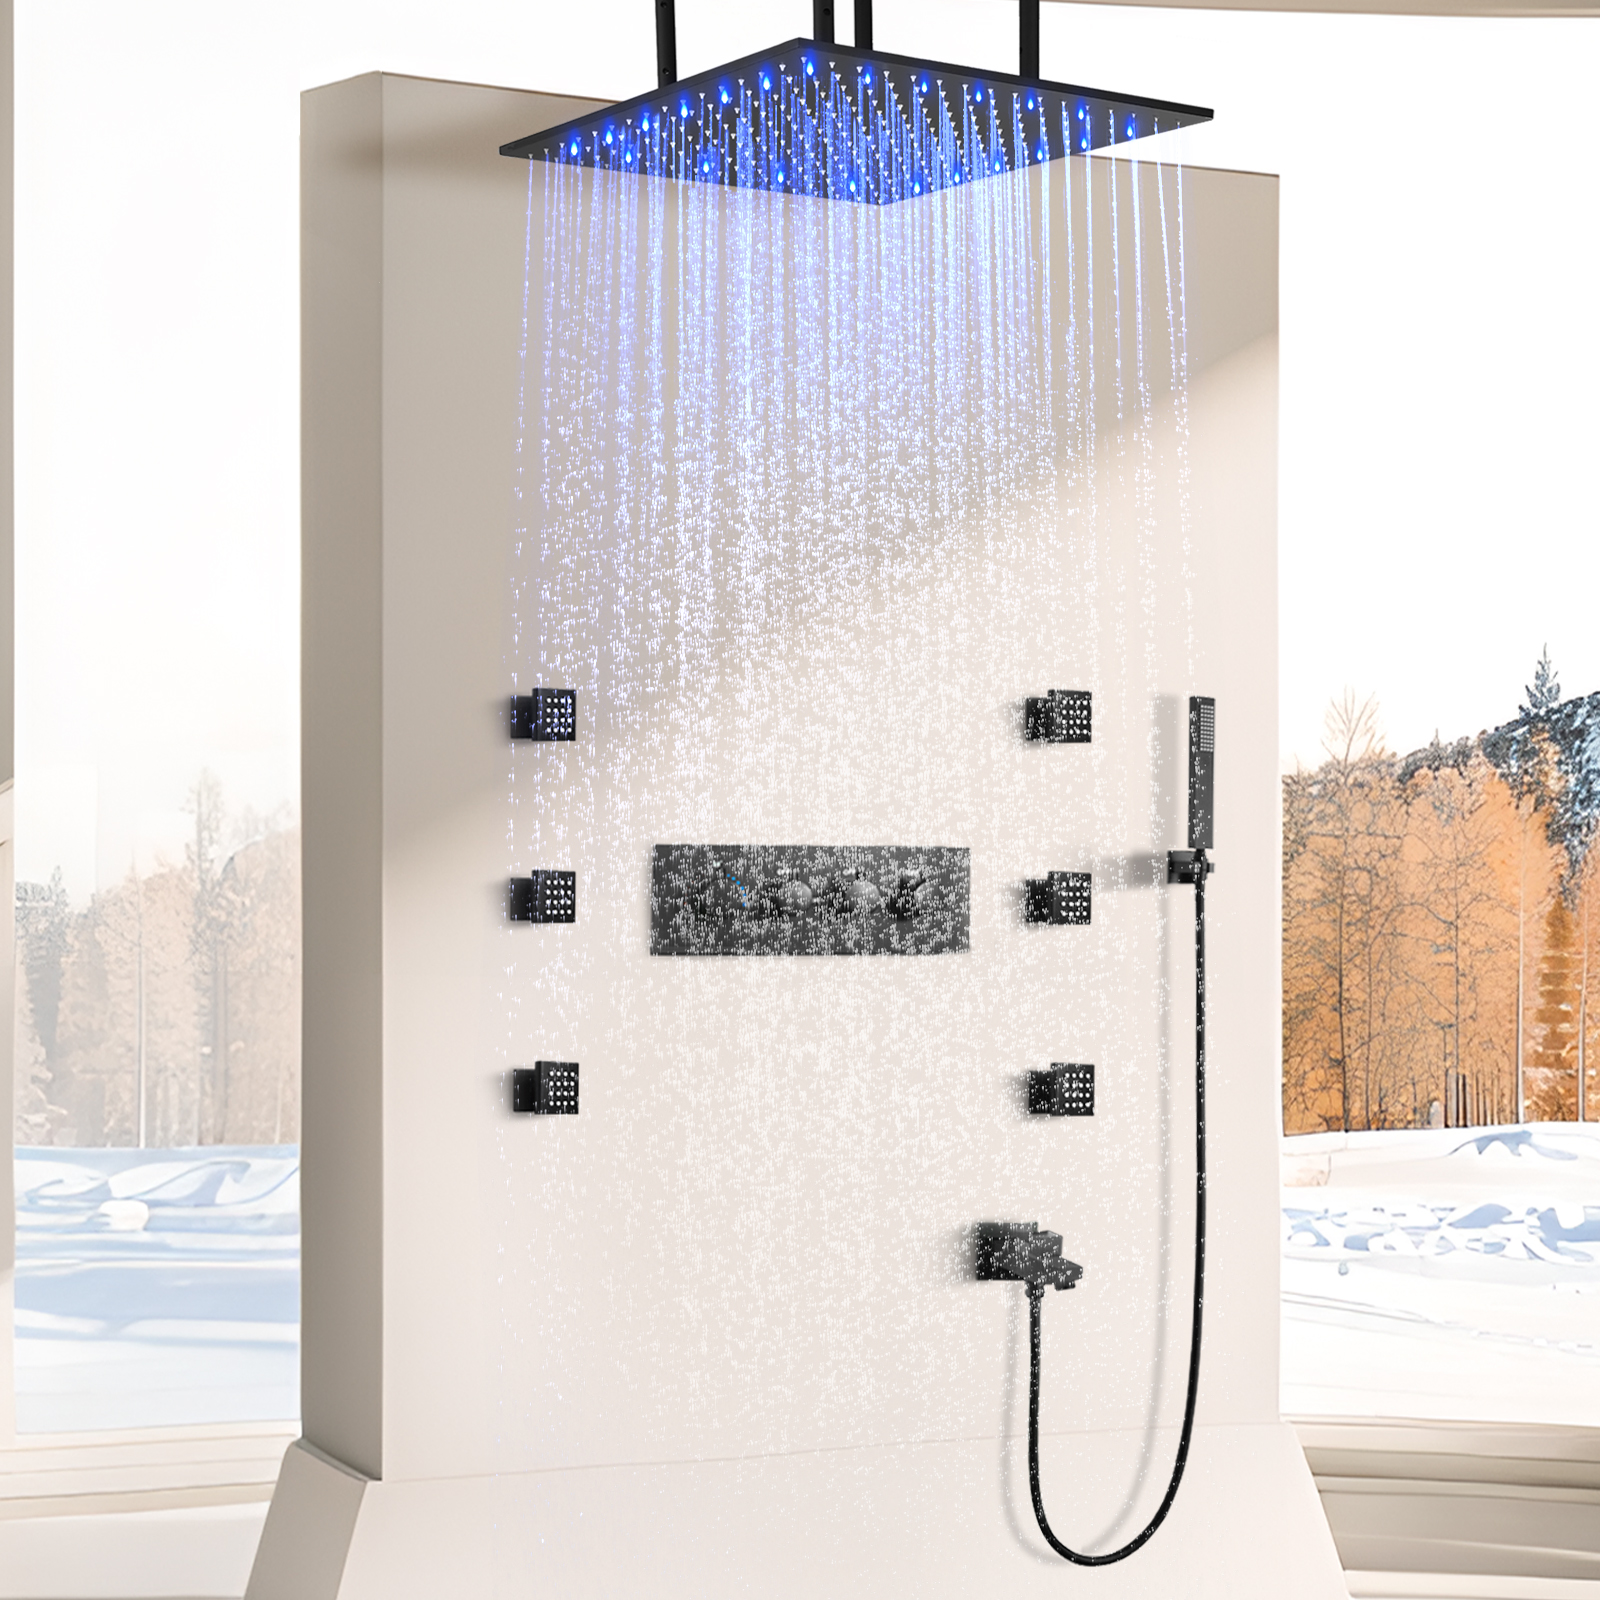 50x50cm Wall -mounted Rain Shower System with Body Spray LED Shower Fixed Device Flushing Set Shower Water Faucet